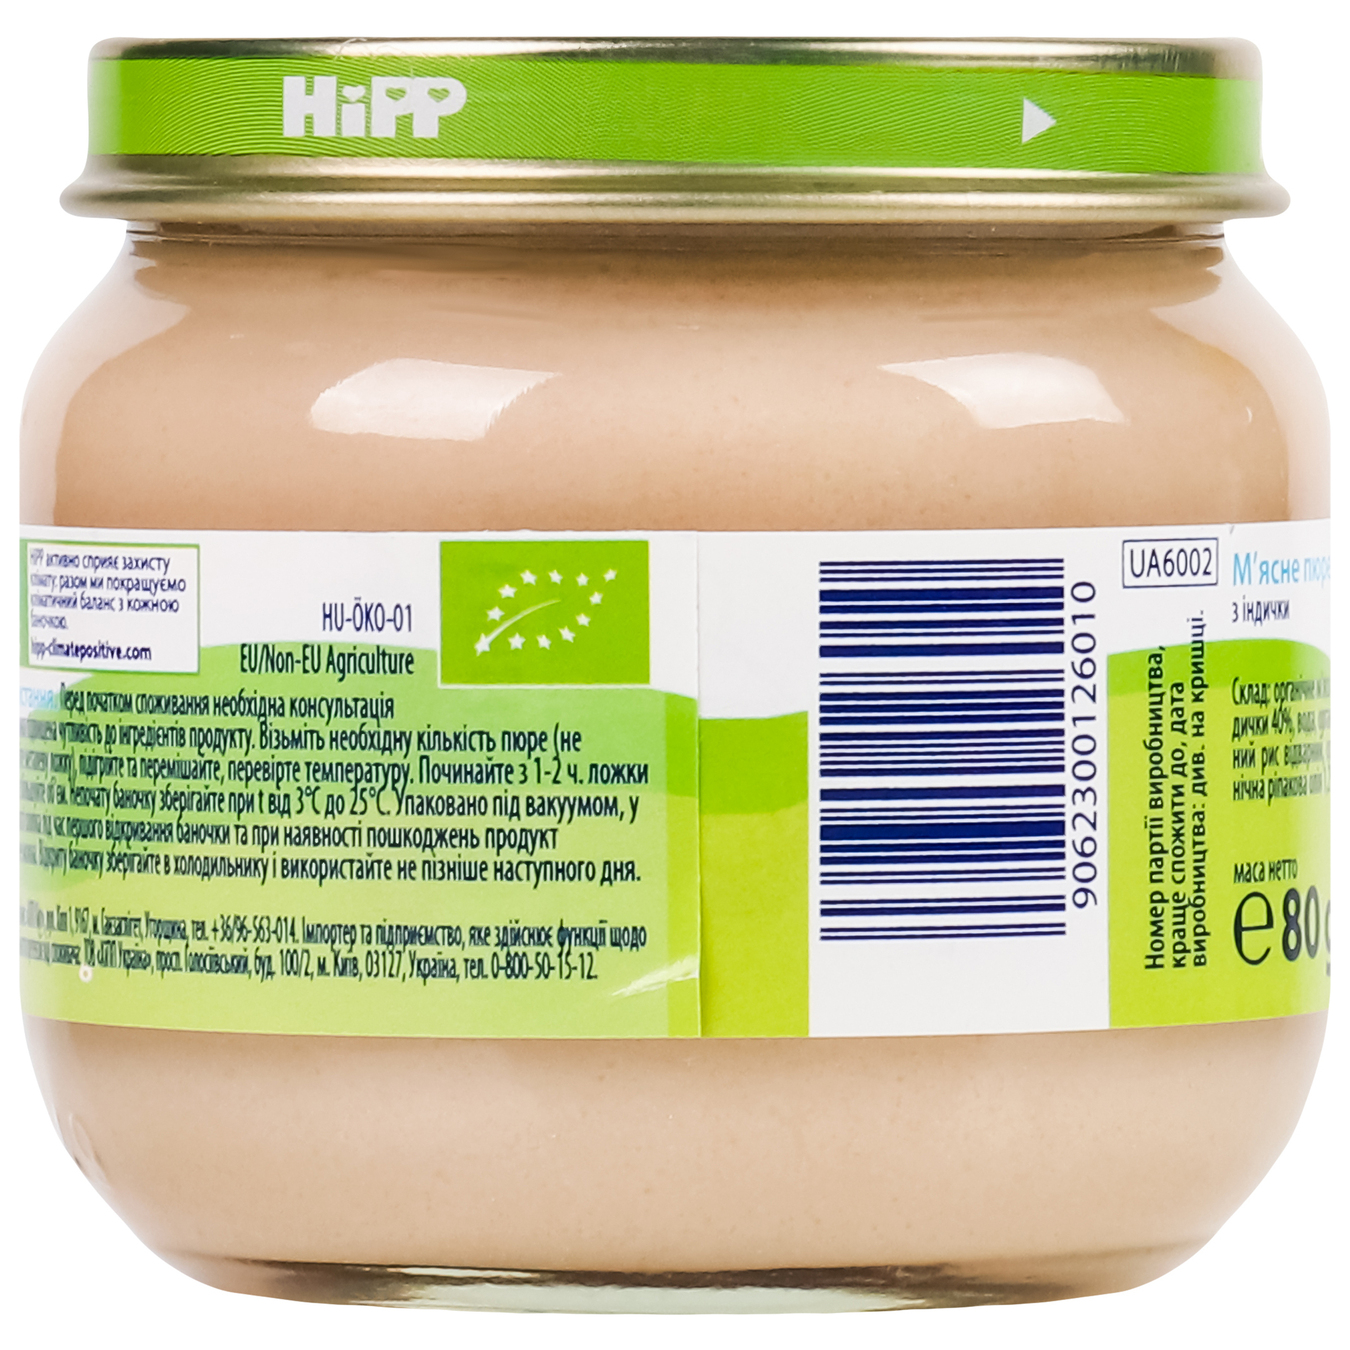 Puree HiPP Turkey without salt for 4+ month old babies 80g 5